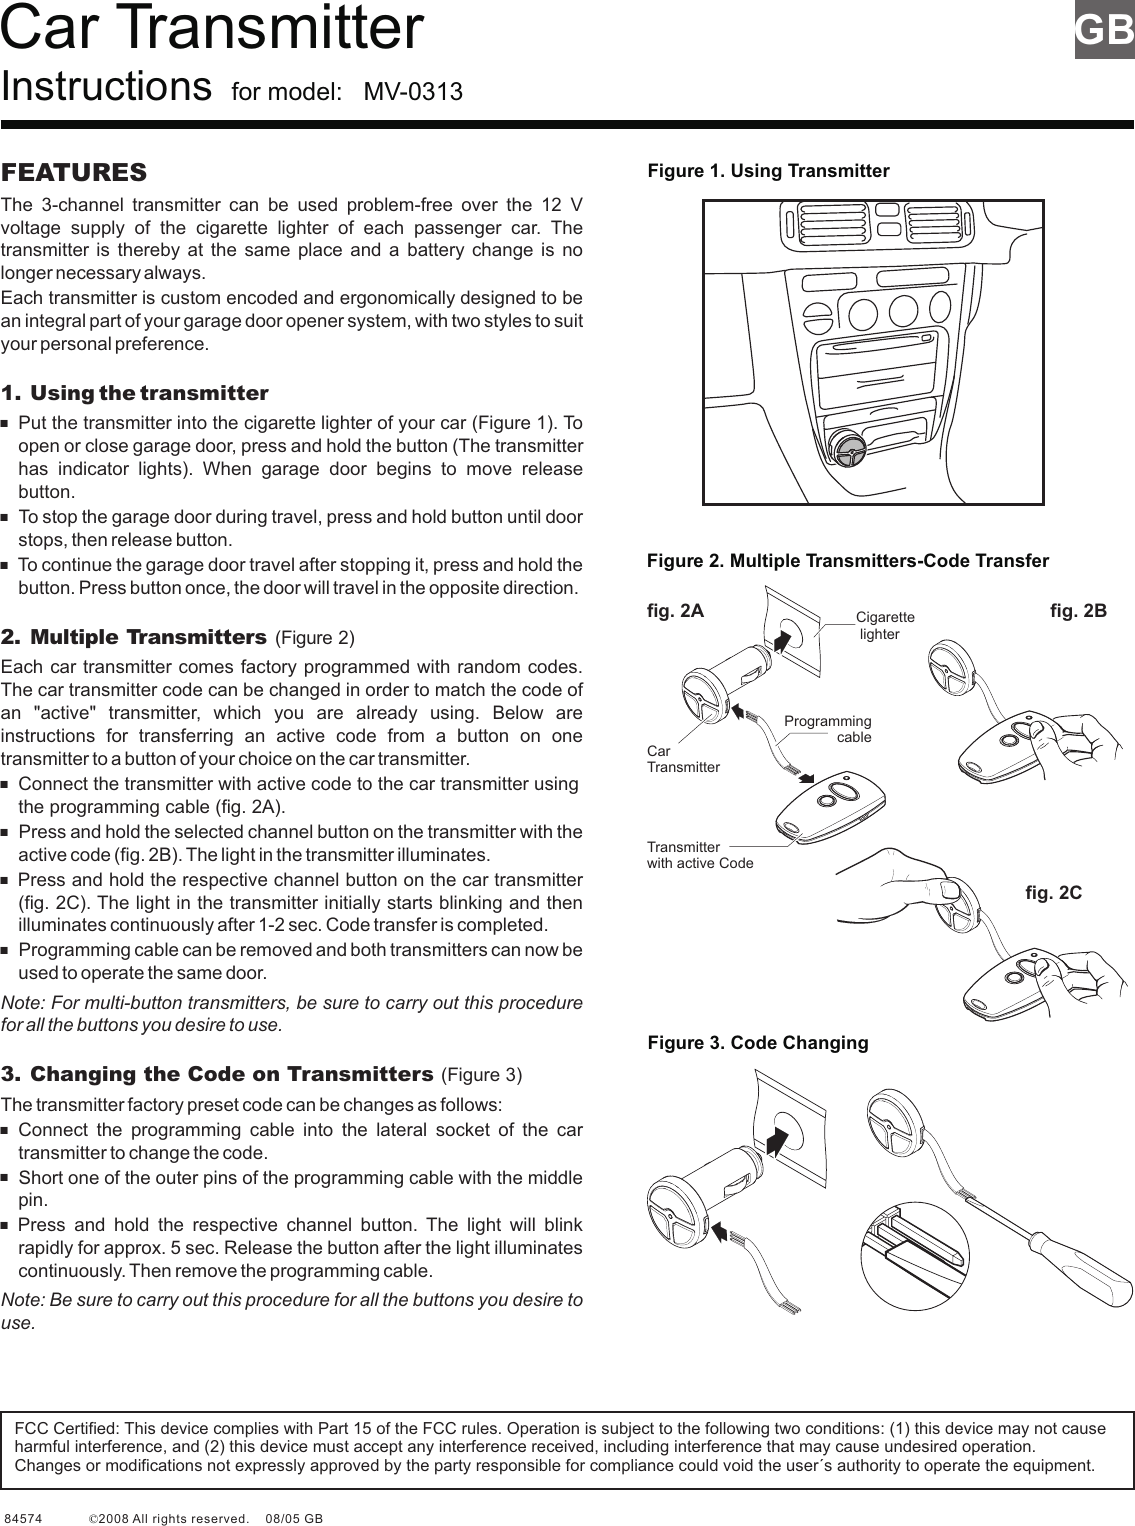 Car Transmitter Instructions  for model:   MV-0313Figure 1. Using TransmitterGBFigure 2. Multiple Transmitters-Code TransferFigure 3. Code ChangingFEATURESThe  3-channel  transmitter  can  be  used  problem-free  over  the  12  V voltage  supply  of  the  cigarette  lighter  of  each  passenger  car.  The transmitter is  thereby  at  the  same  place  and  a  battery change  is  no longer necessary always. Each transmitter is custom encoded and ergonomically designed to be an integral part of your garage door opener system, with two styles to suit your personal preference.1. Using the transmitter+Put the transmitter into the cigarette lighter of your car (Figure 1). To open or close garage door, press and hold the button (The transmitter has  indicator  lights).  When  garage  door  begins  to  move  release button.+To stop the garage door during travel, press and hold button until door stops, then release button.+To continue the garage door travel after stopping it, press and hold the button. Press button once, the door will travel in the opposite direction.Each car transmitter comes factory programmed with random codes. The car transmitter code can be changed in order to match the code of an  &quot;active&quot;  transmitter,  which  you  are  already  using.  Below  are instructions  for  transferring  an  active  code  from  a  button  on  one transmitter to a button of your choice on the car transmitter.+Connect the transmitter with active code to the car transmitter using the programming cable (fig. 2A).+Press and hold the selected channel button on the transmitter with the active code (fig. 2B). The light in the transmitter illuminates.+Press and hold the respective channel button on the car transmitter (fig. 2C). The light in the transmitter initially starts blinking and then illuminates continuously after 1-2 sec. Code transfer is completed.+Programming cable can be removed and both transmitters can now be used to operate the same door.Note: For multi-button transmitters, be sure to carry out this procedure for all the buttons you desire to use.+Connect  the  programming  cable  into  the  lateral  socket  of  the  car transmitter to change the code.+Short one of the outer pins of the programming cable with the middle pin.+Press  and  hold  the  respective  channel  button.  The  light  will  blink rapidly for approx. 5 sec. Release the button after the light illuminates continuously. Then remove the programming cable.Note: Be sure to carry out this procedure for all the buttons you desire to use.2. Multiple Transmitters (Figure 2)3. Changing the Code on Transmitters (Figure 3)The transmitter factory preset code can be changes as follows:Programming cableCigarette lighterTransmitter with active Codefig. 2A fig. 2Bfig. 2CCar TransmitterFCC Certified: This device complies with Part 15 of the FCC rules. Operation is subject to the following two conditions: (1) this device may not cause harmful interference, and (2) this device must accept any interference received, including interference that may cause undesired operation.Changes or modifications not expressly approved by the party responsible for compliance could void the user´s authority to operate the equipment.84574             2008 All rights reserved.    08/05 GB                                                                    ©